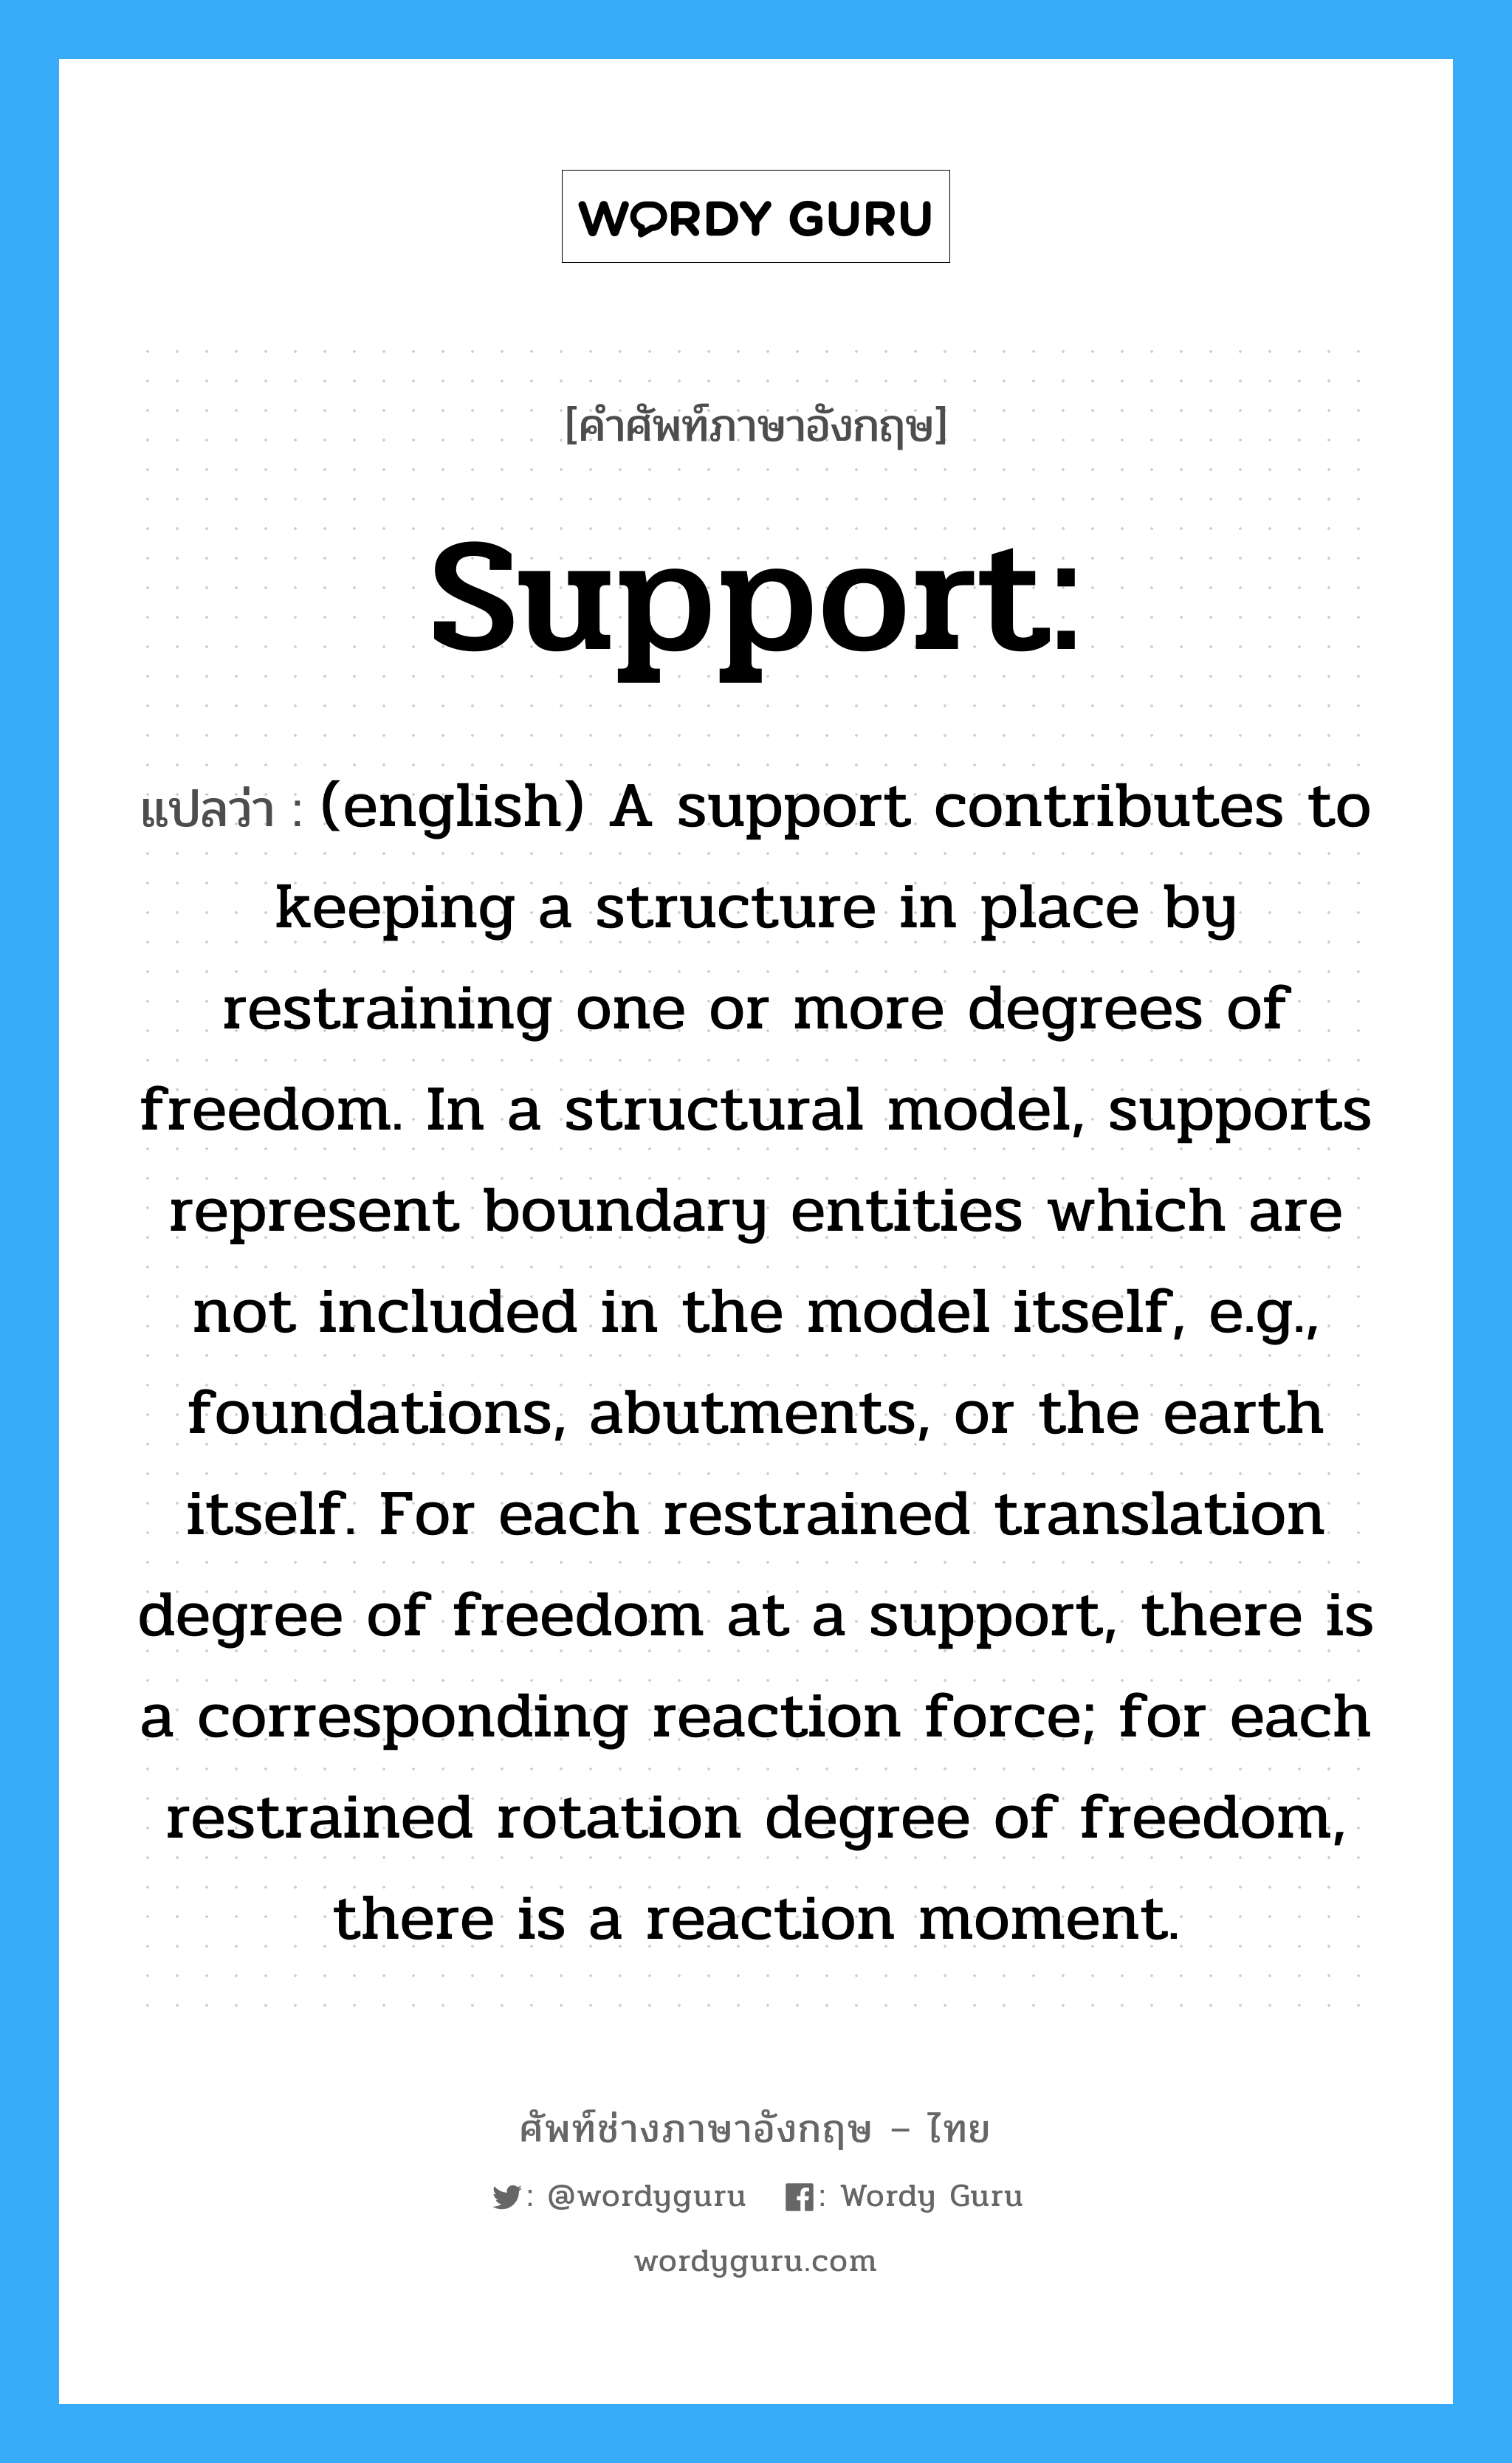 Support: แปลว่า?, คำศัพท์ช่างภาษาอังกฤษ - ไทย Support: คำศัพท์ภาษาอังกฤษ Support: แปลว่า (english) A support contributes to keeping a structure in place by restraining one or more degrees of freedom. In a structural model, supports represent boundary entities which are not included in the model itself, e.g., foundations, abutments, or the earth itself. For each restrained translation degree of freedom at a support, there is a corresponding reaction force; for each restrained rotation degree of freedom, there is a reaction moment.